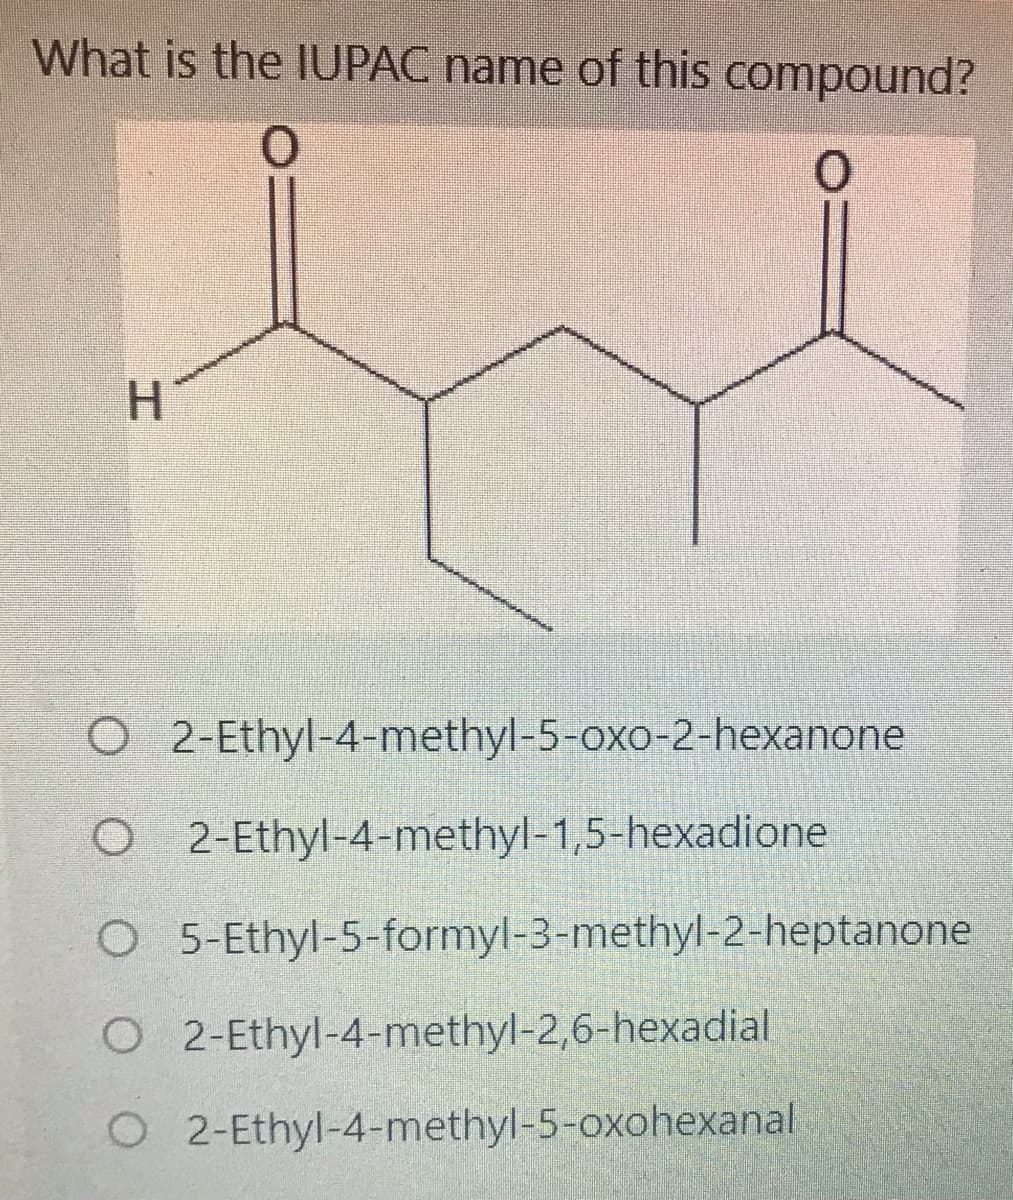 What is the IUPAC name of this compound?
H.
O 2-Ethyl-4-methyl-5-oxo-2-hexanone
O 2-Ethyl-4-methyl-1,5-hexadione
O 5-Ethyl-5-formyl-3-methyl-2-heptanone
O 2-Ethyl-4-methyl-2,6-hexadial
O 2-Ethyl-4-methyl-5-oxohexanal
